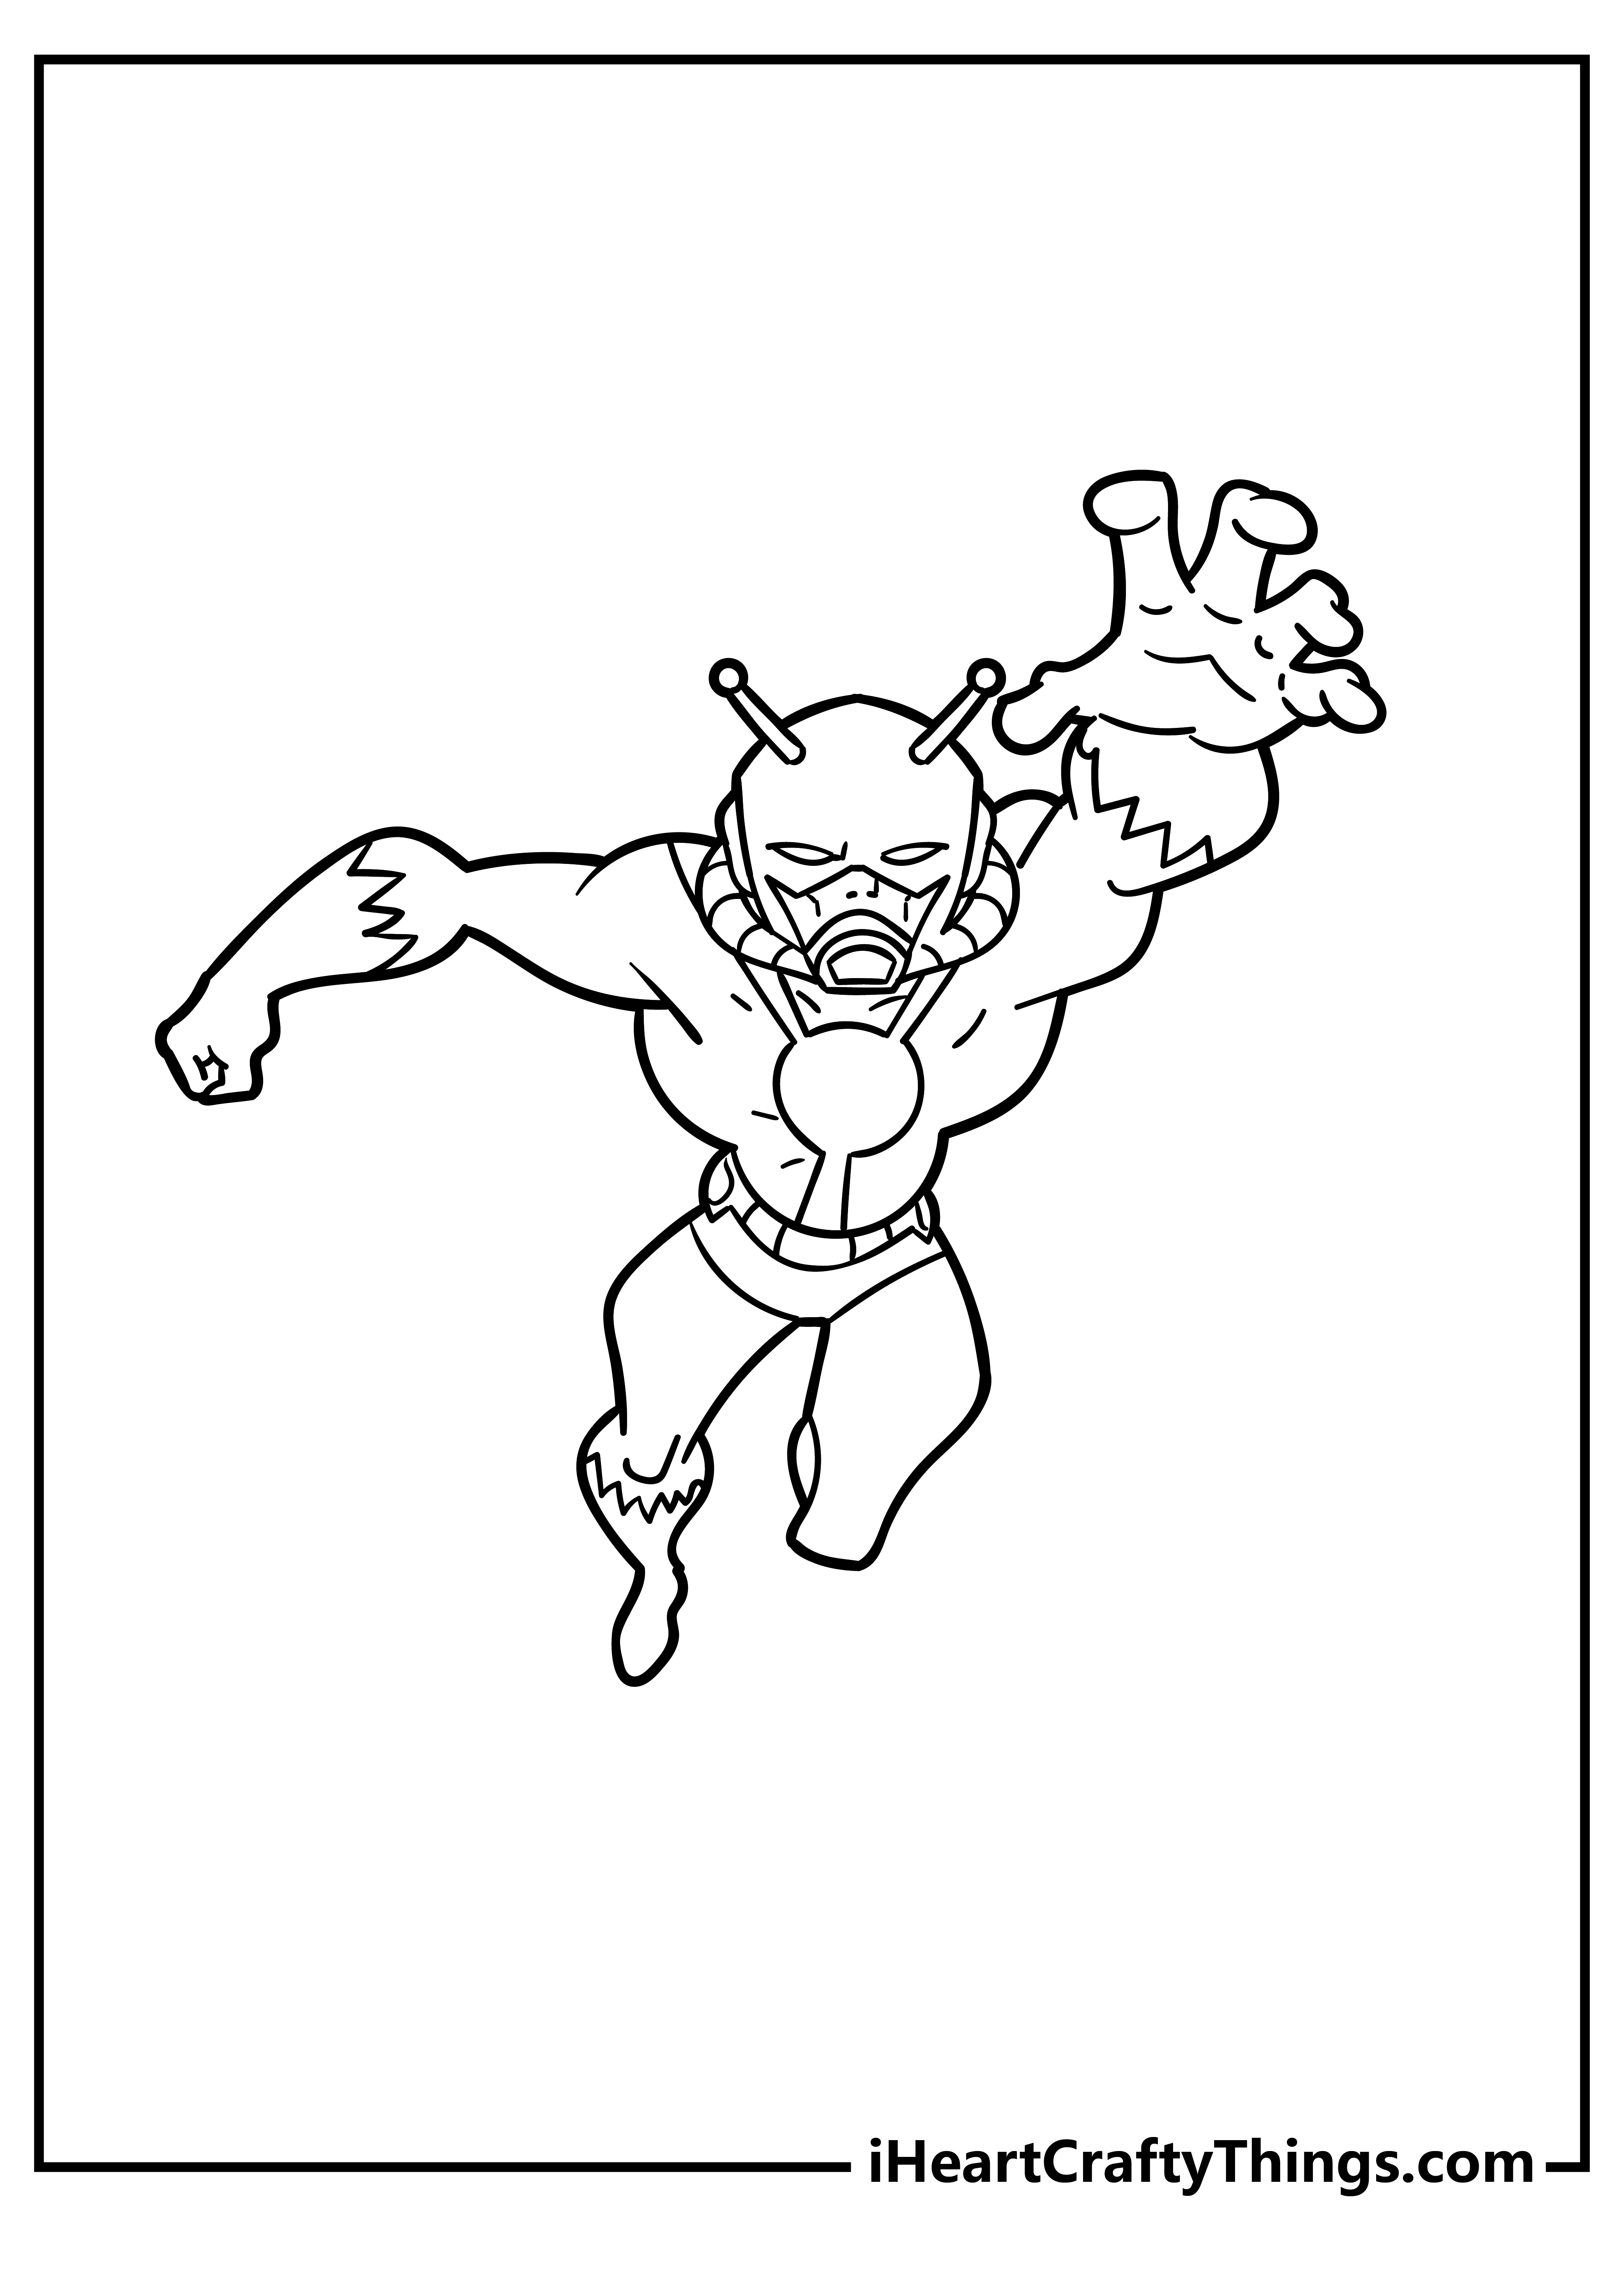 Avengers Coloring Book for adults free download